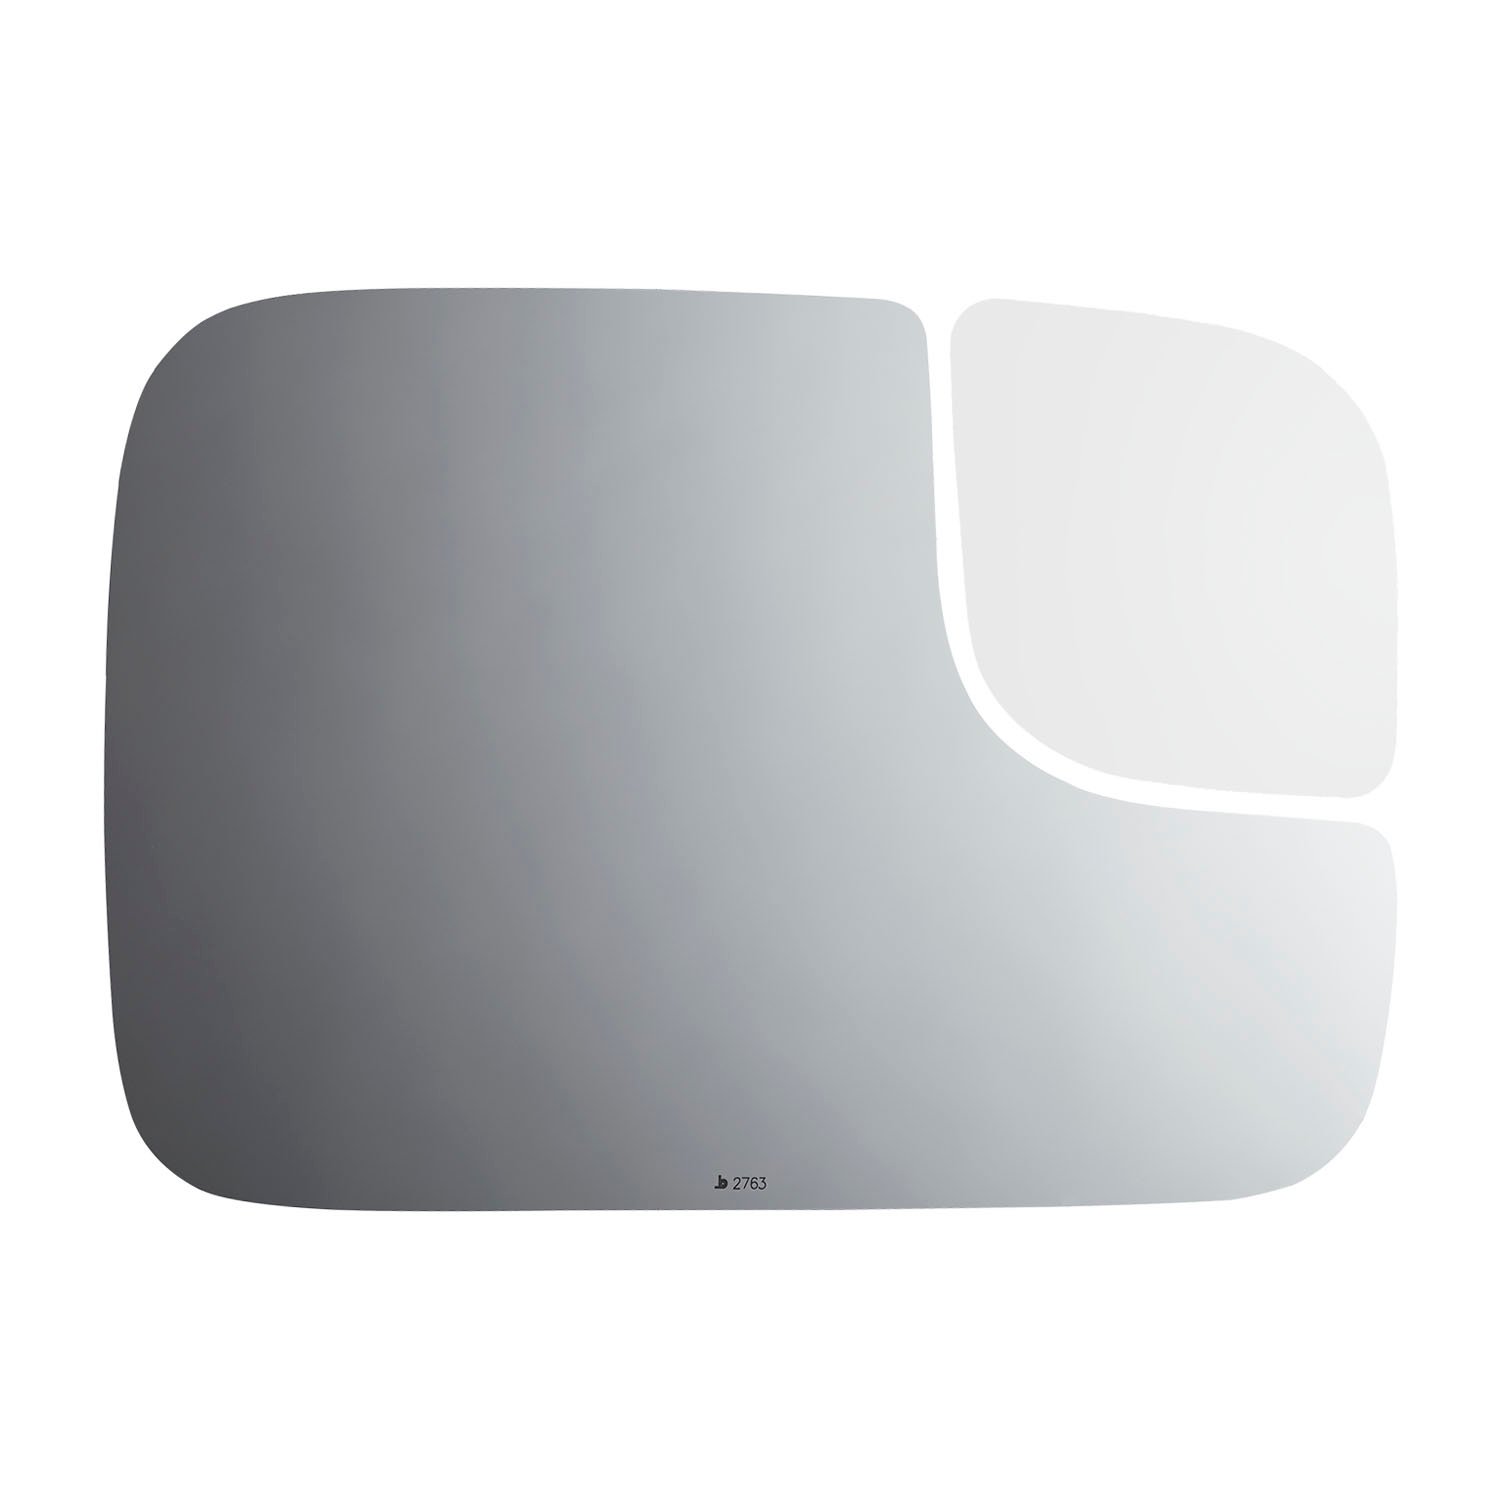 2763 SIDE VIEW MIRROR